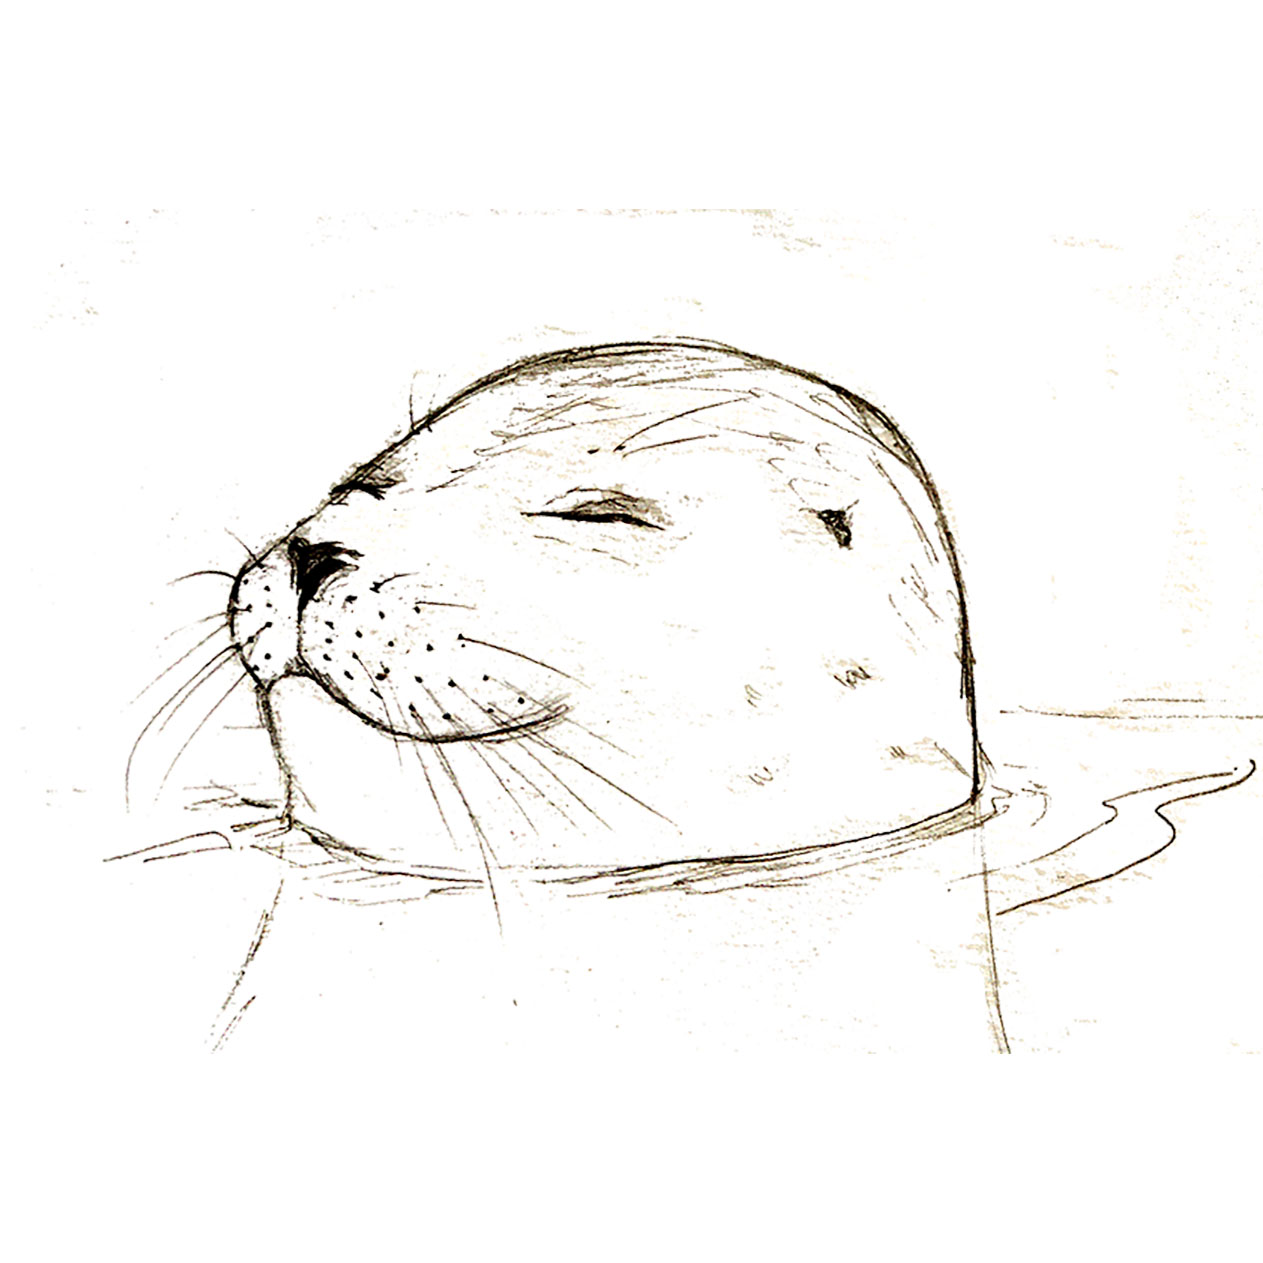 Contentment is a seal at rest. Pencil and Adobe Photoshop.